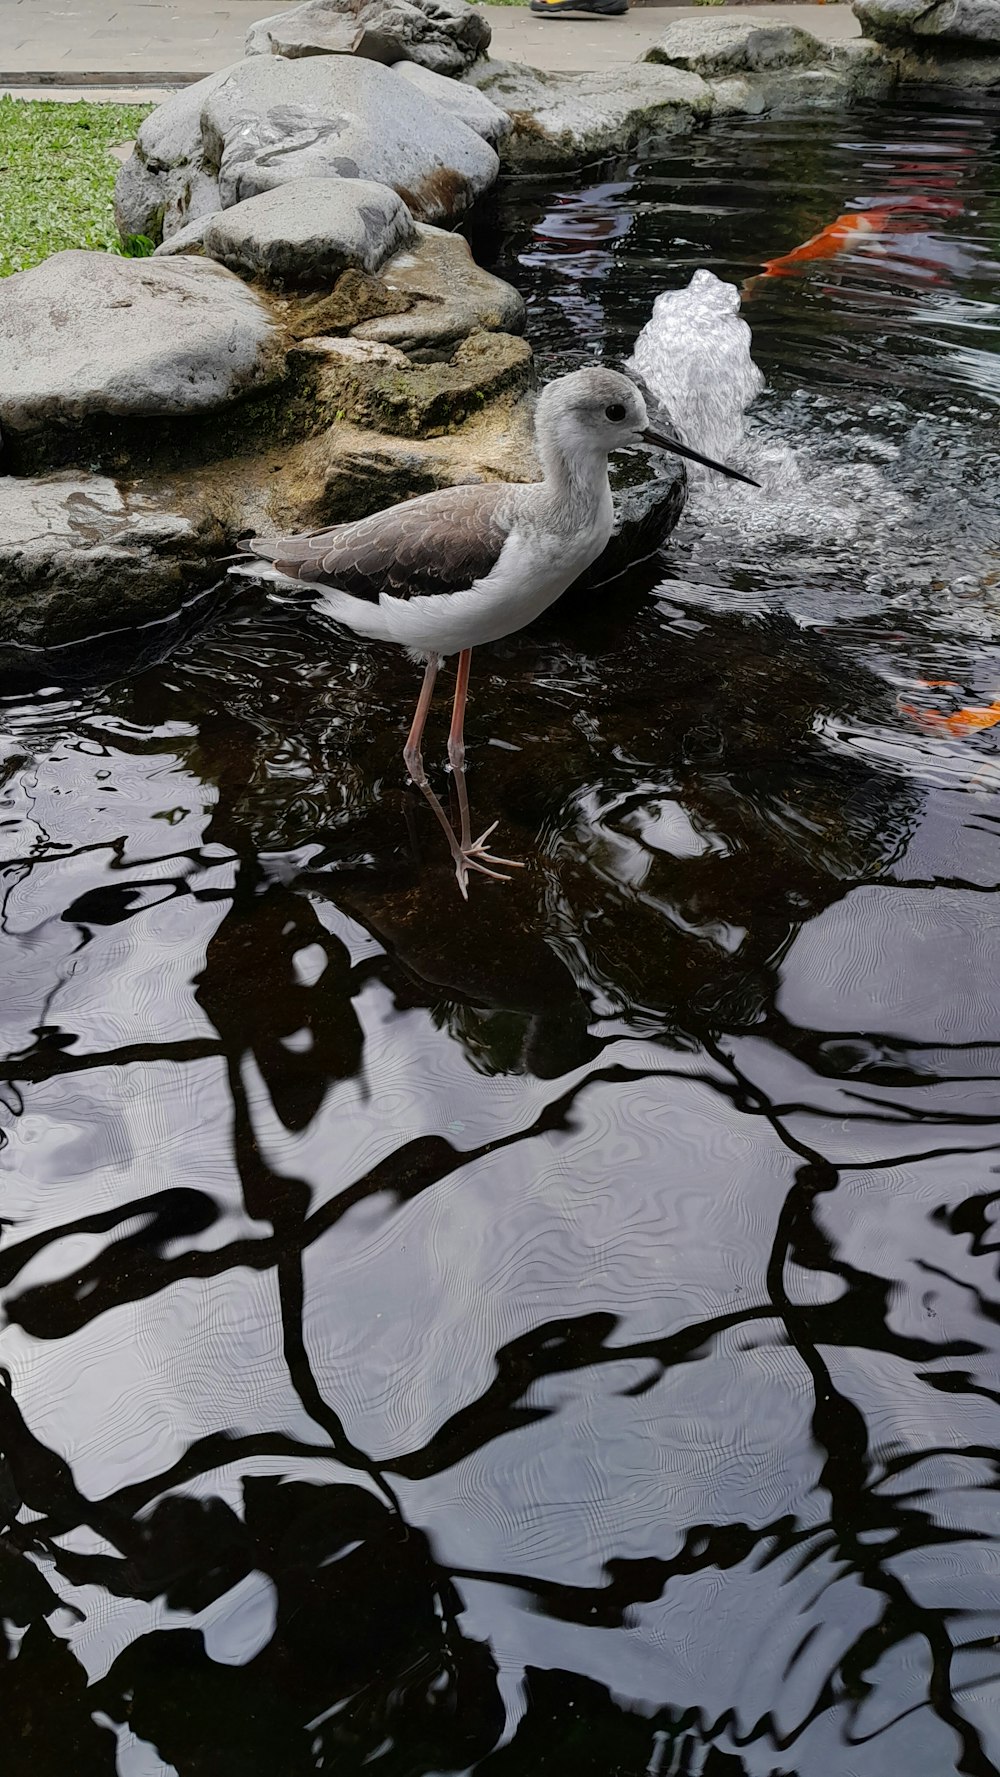 a bird is standing in the water near some rocks